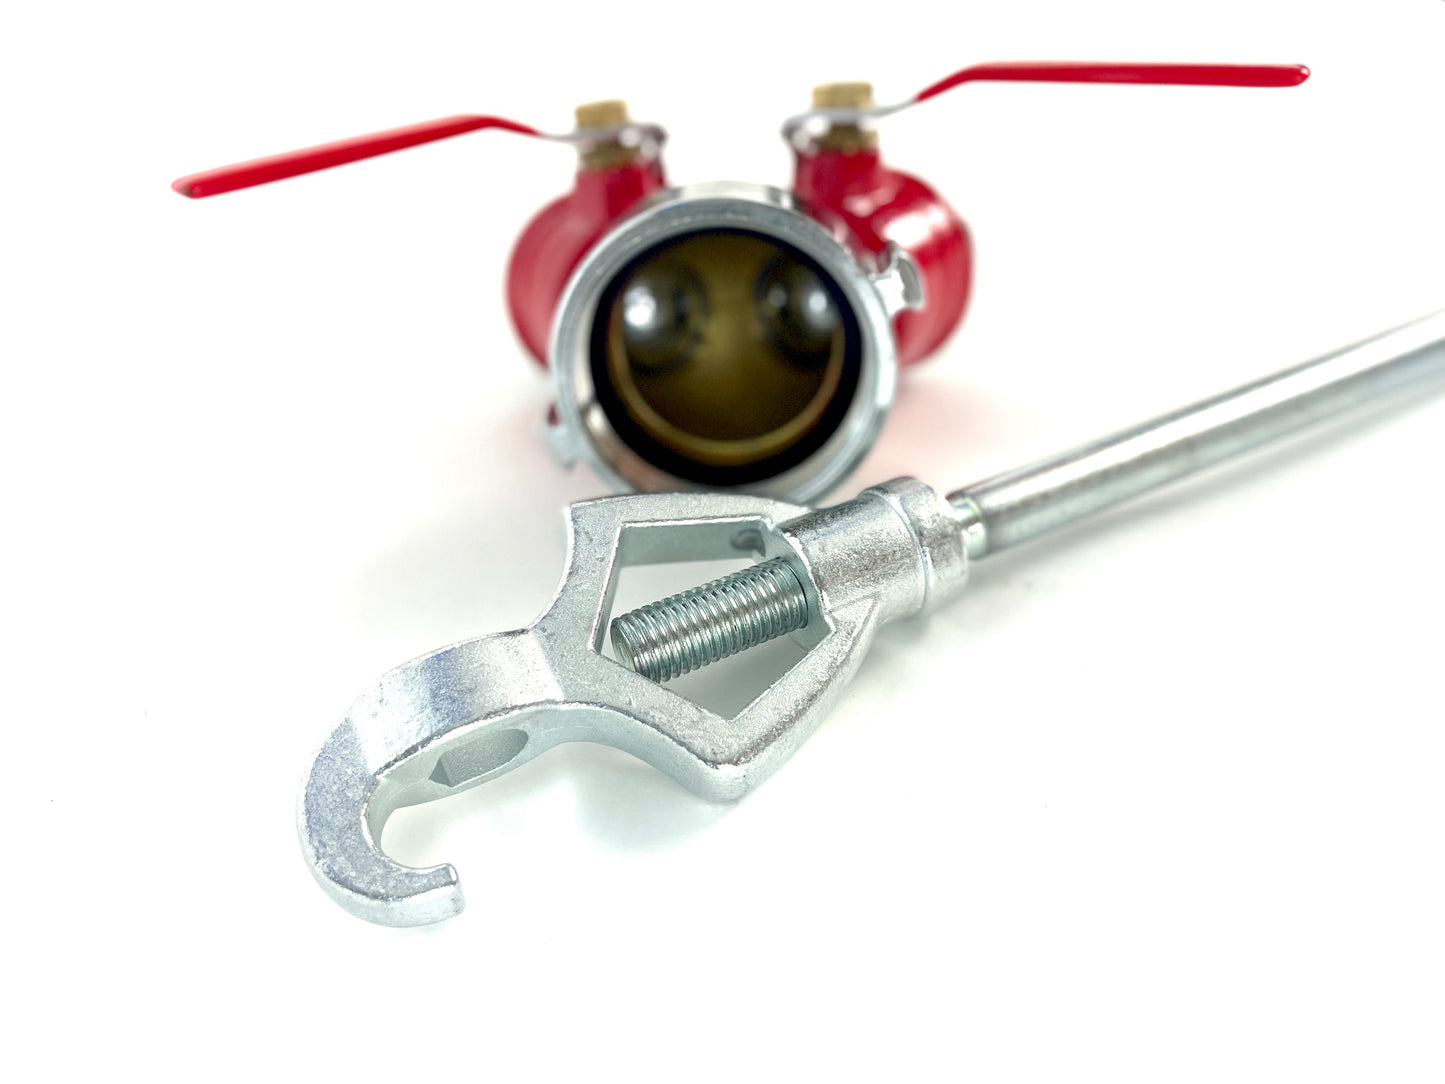 The ACE Fire Preparedness Gated WYE Valve and Wrench Bundle